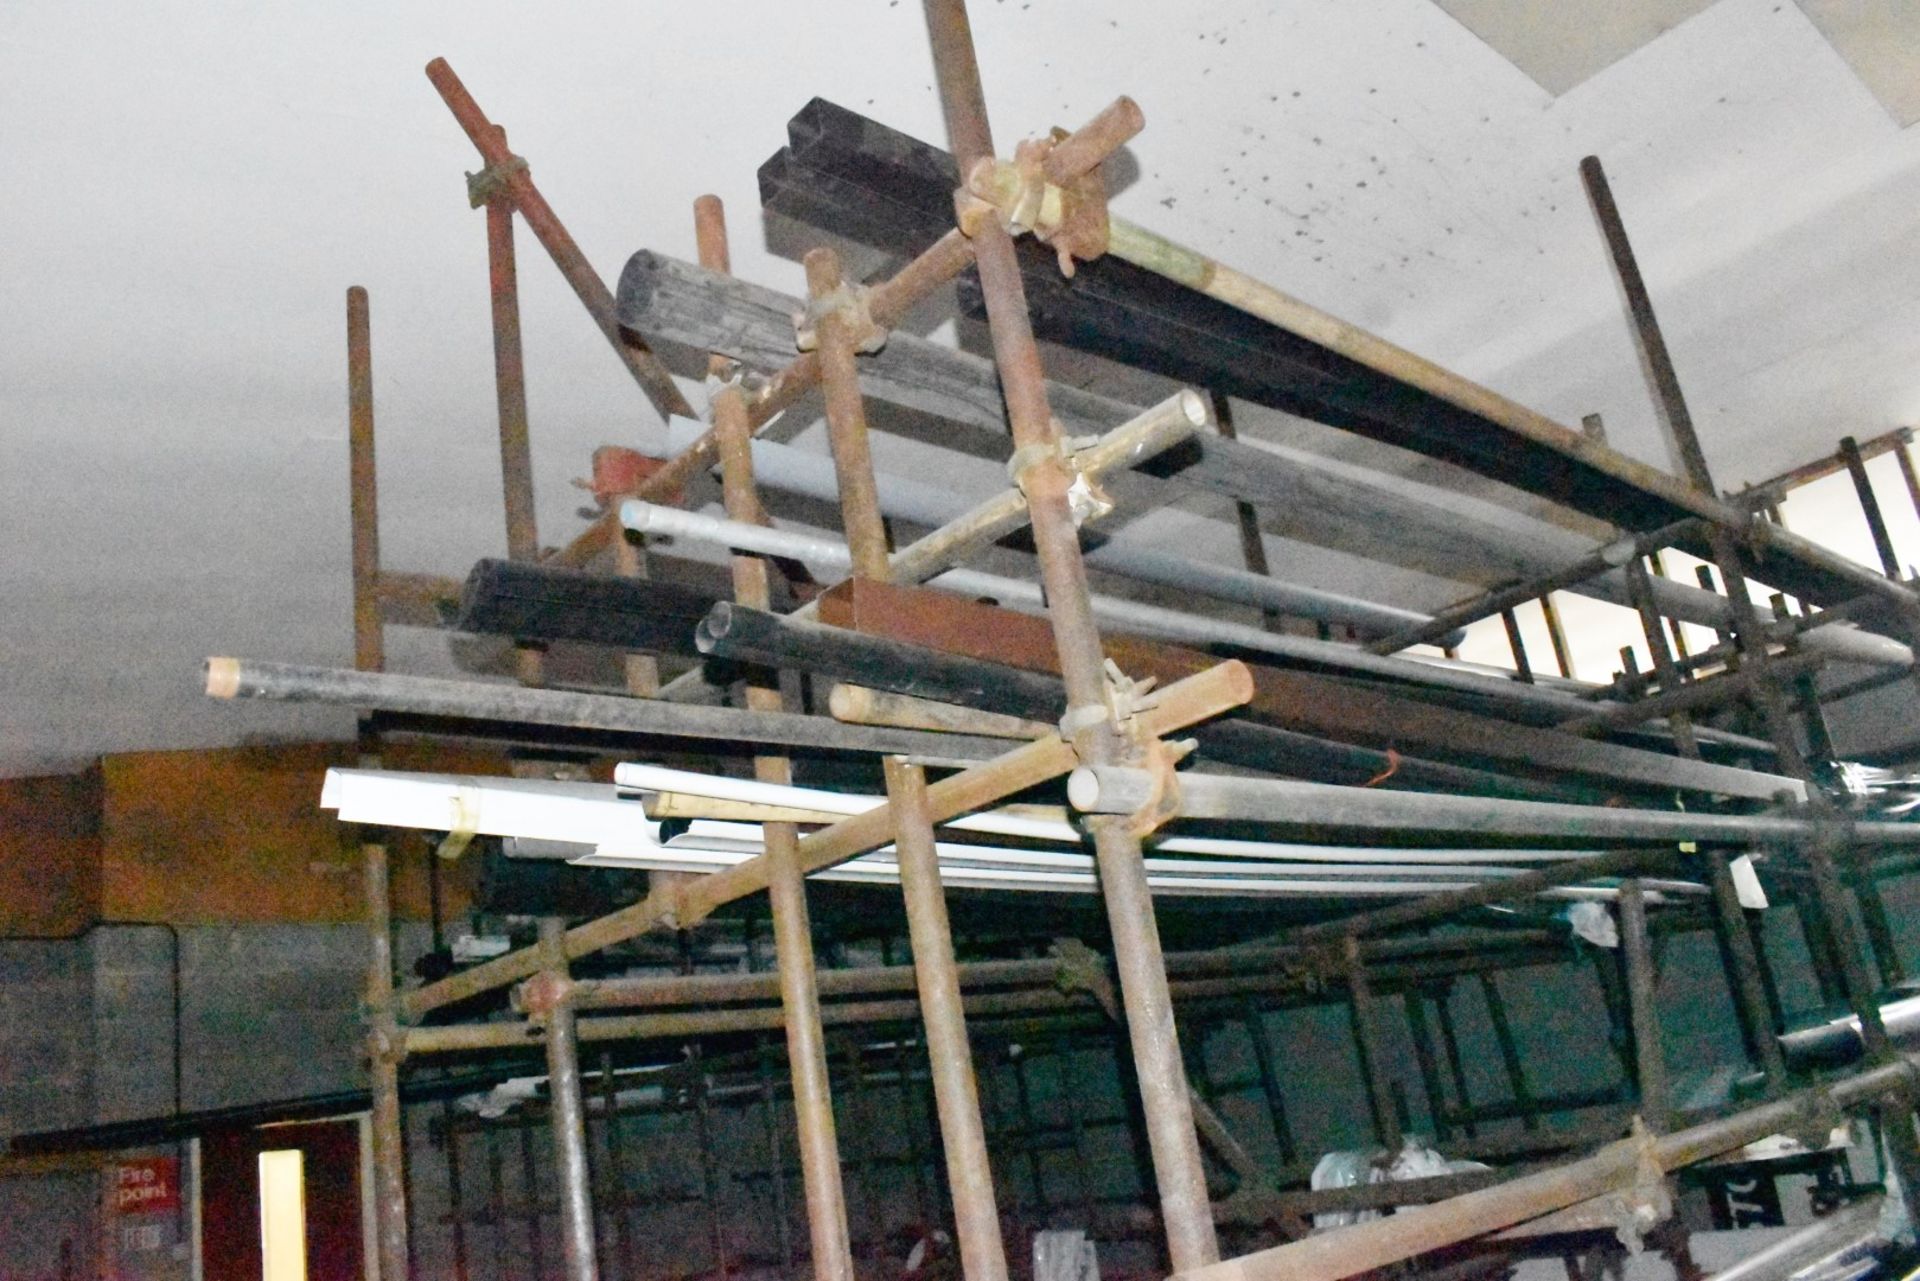 1 x Large Collection of Scaffolding and Fixtures Covering a Floor Space of Approx 13 x 13ft - Image 10 of 15